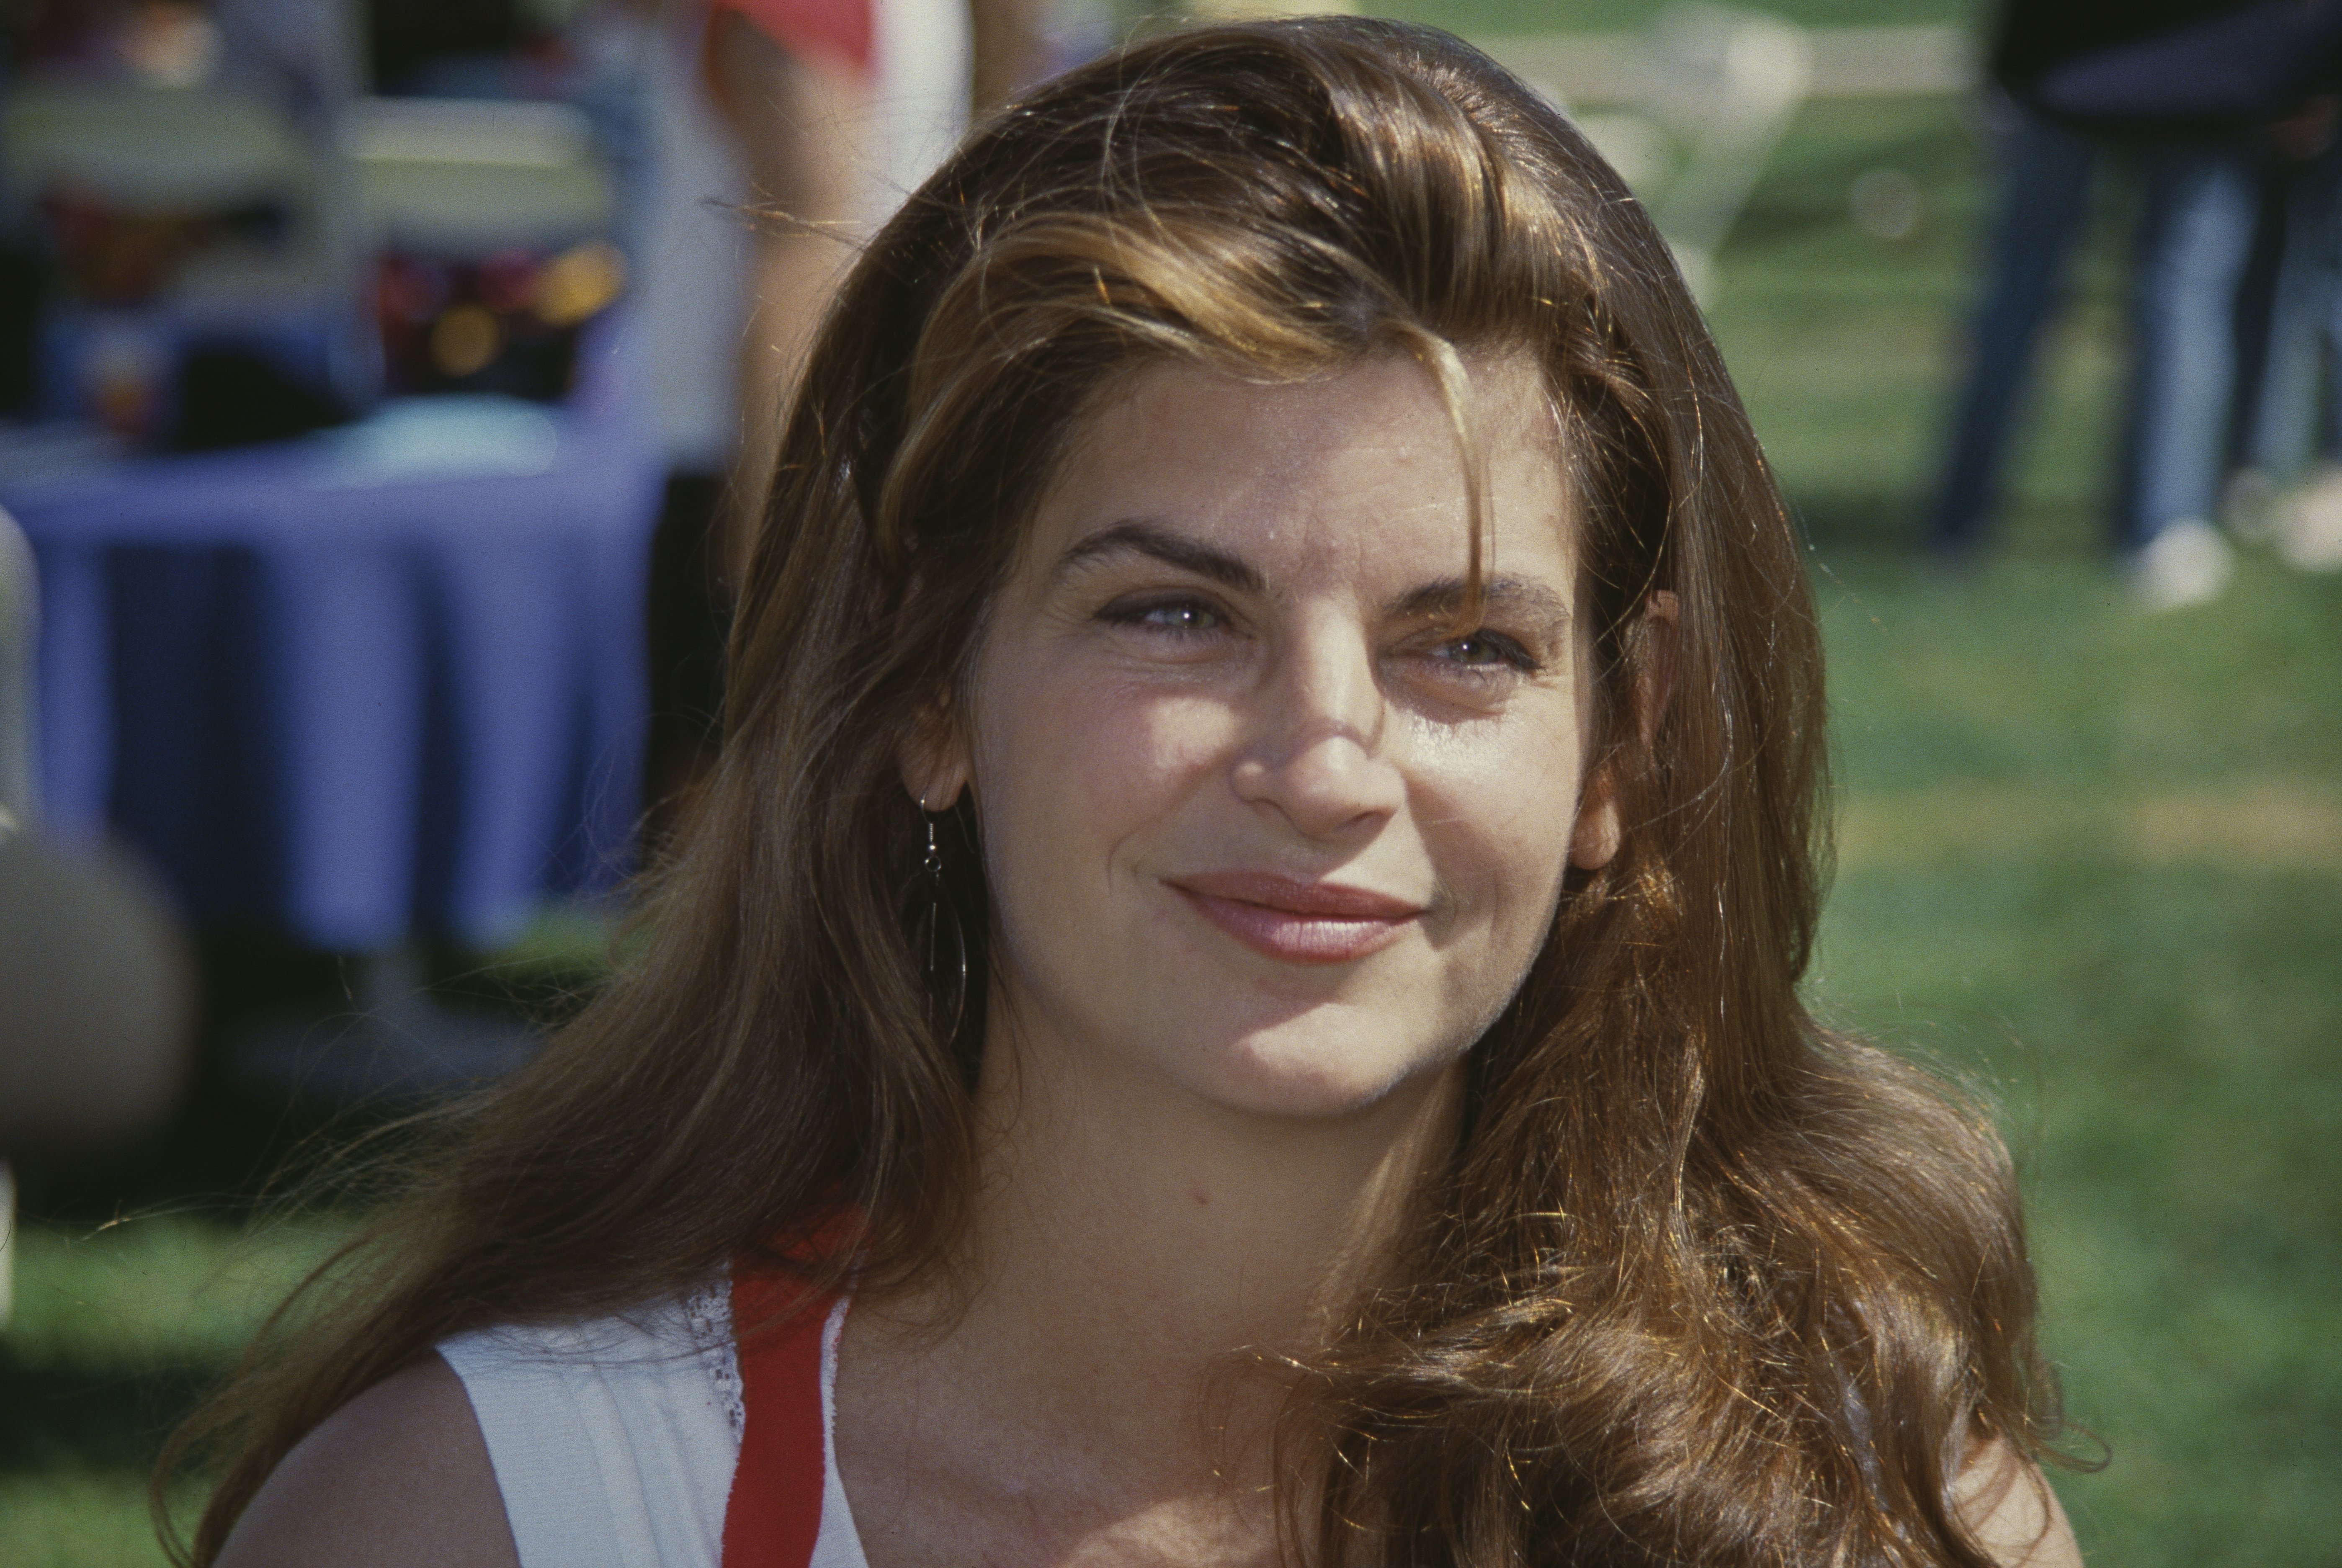 Kirstie Alley at the Tom Bradley Stadium, in the grounds of Birmingham High School in Van Nuys, California, 28th September 1991. | Source: Getty Images